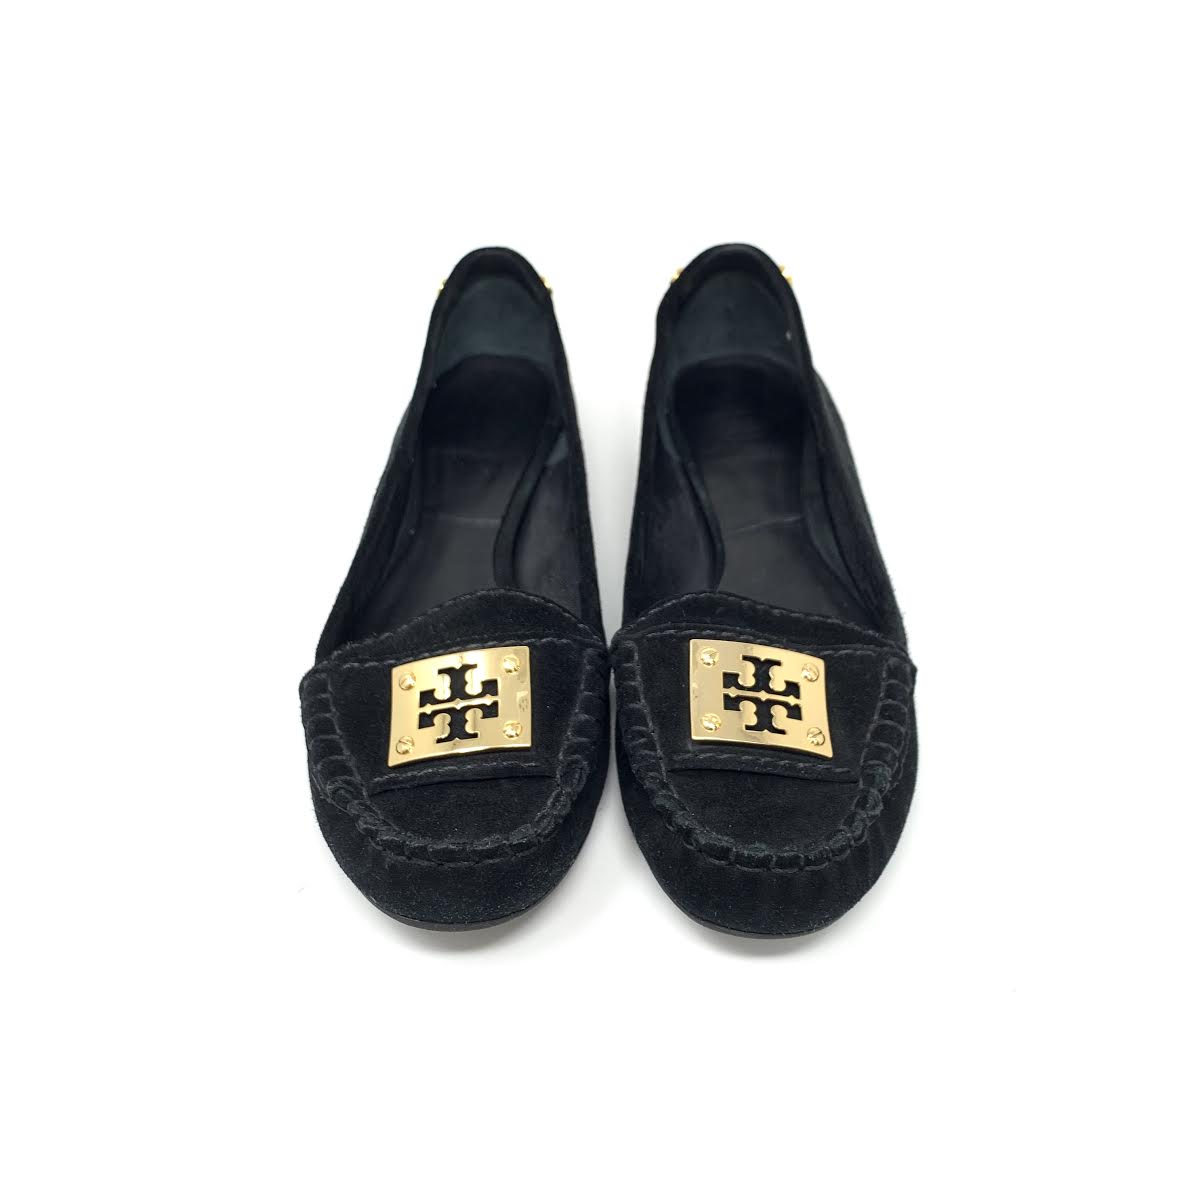 Tory Burch Square Toe Loafers - Size 7